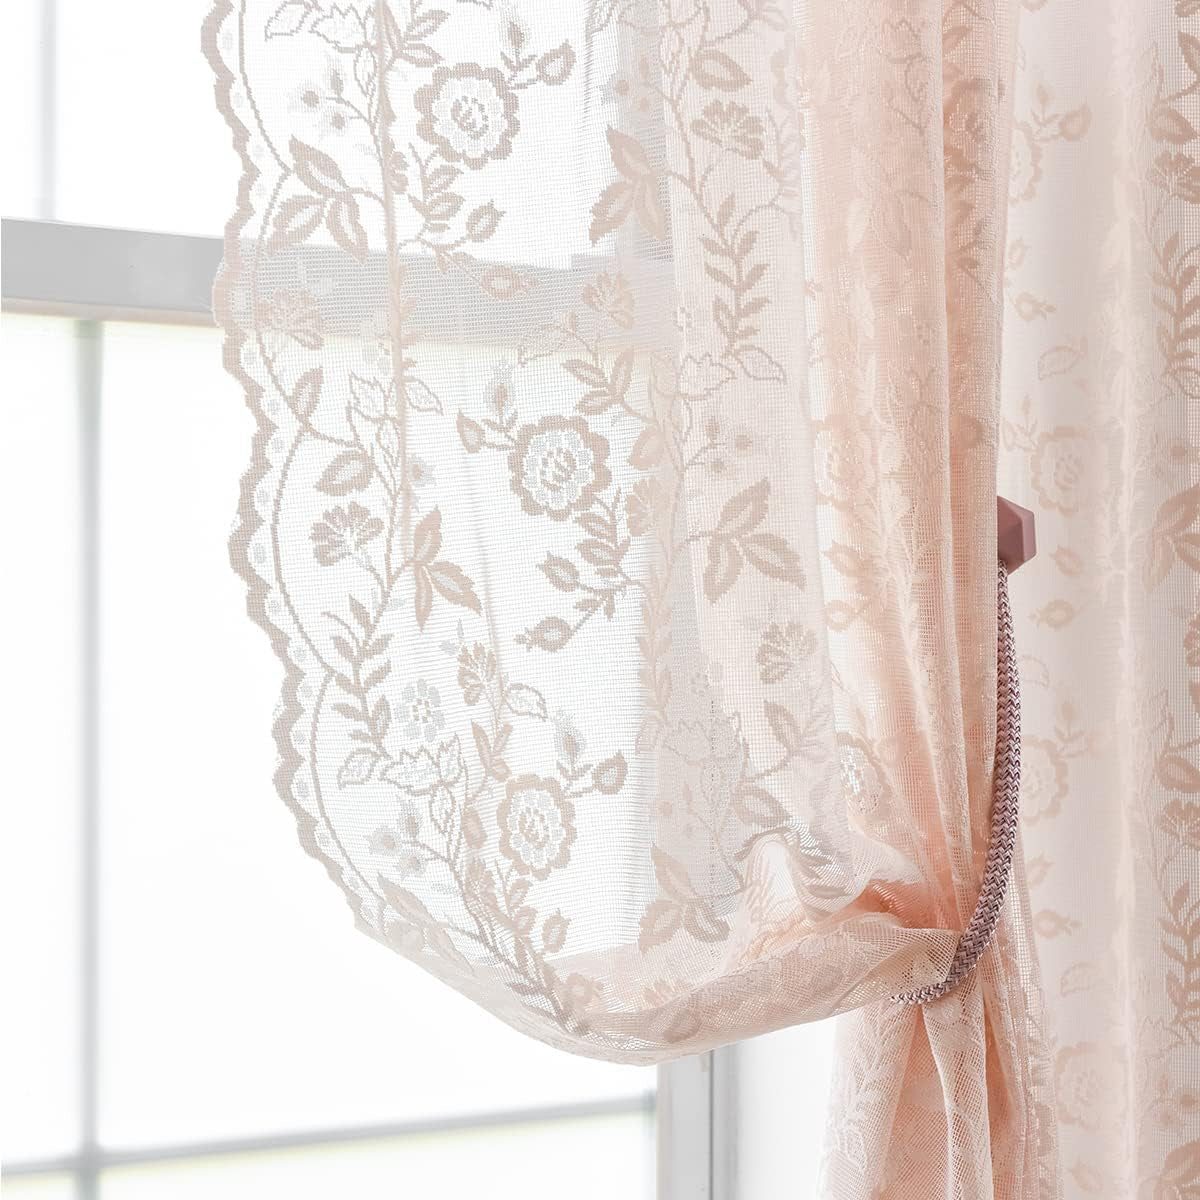 FINECITY Lace Curtains Country Rustic Floral Sheer Curtains for Living Room 72 Inch Length Drapes Vintage Floral Pattern Farmhouse Privacy Light Filtering Sheer Curtain 2 Panels, 52 X 72 Inch, Grey  Keyu Textile Blush Pink W52 X L54 Inch 